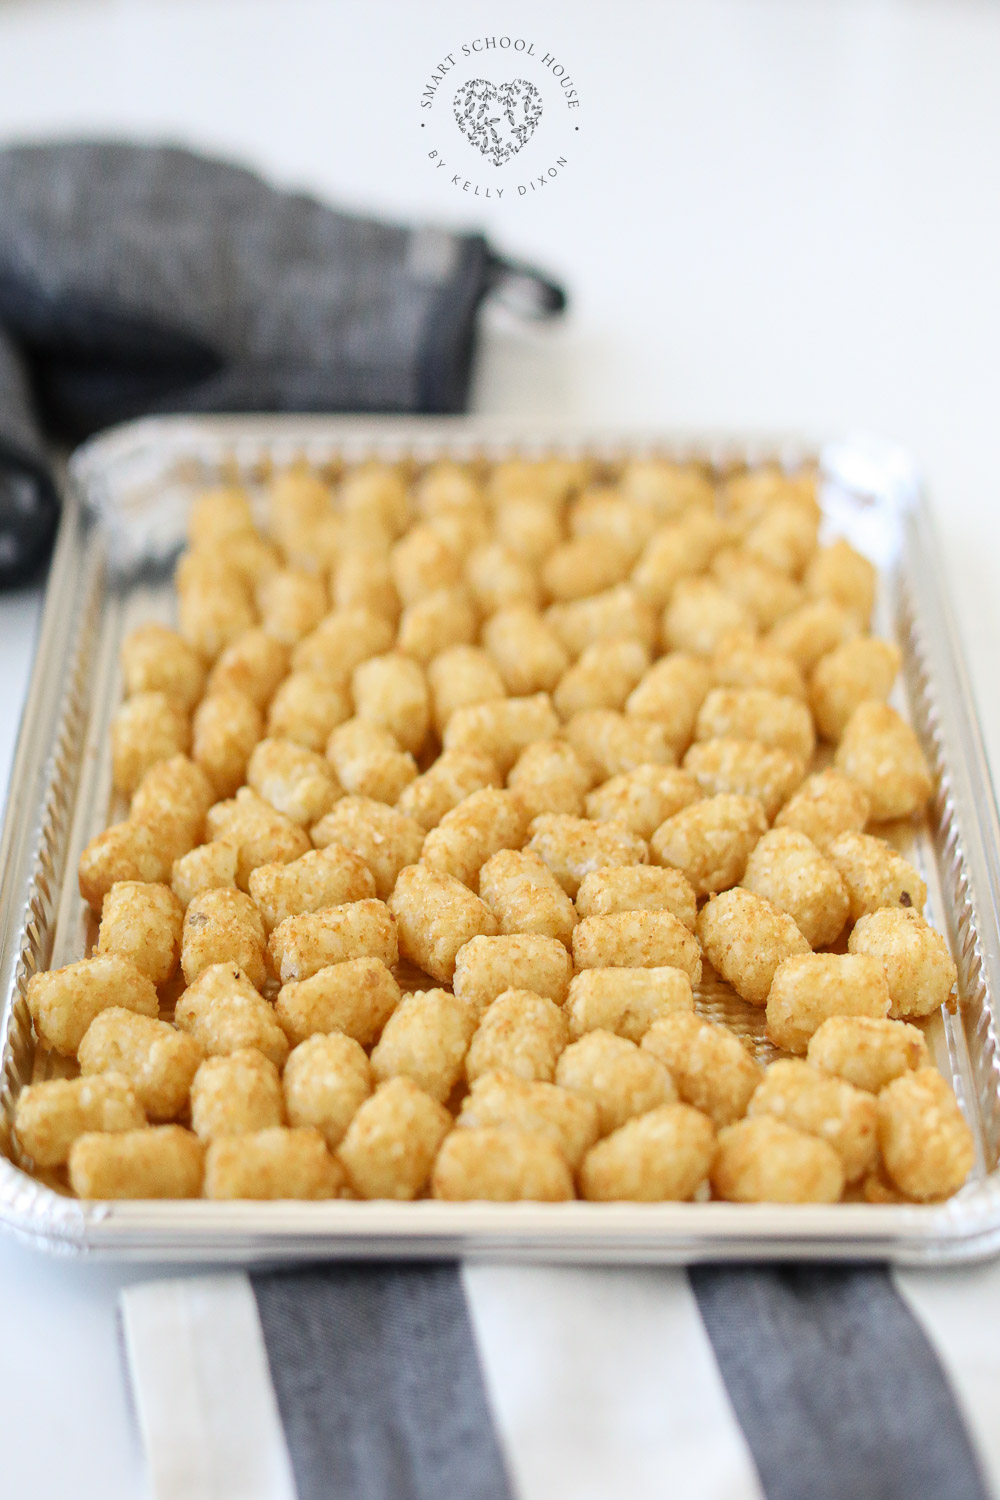 Baked tater tots